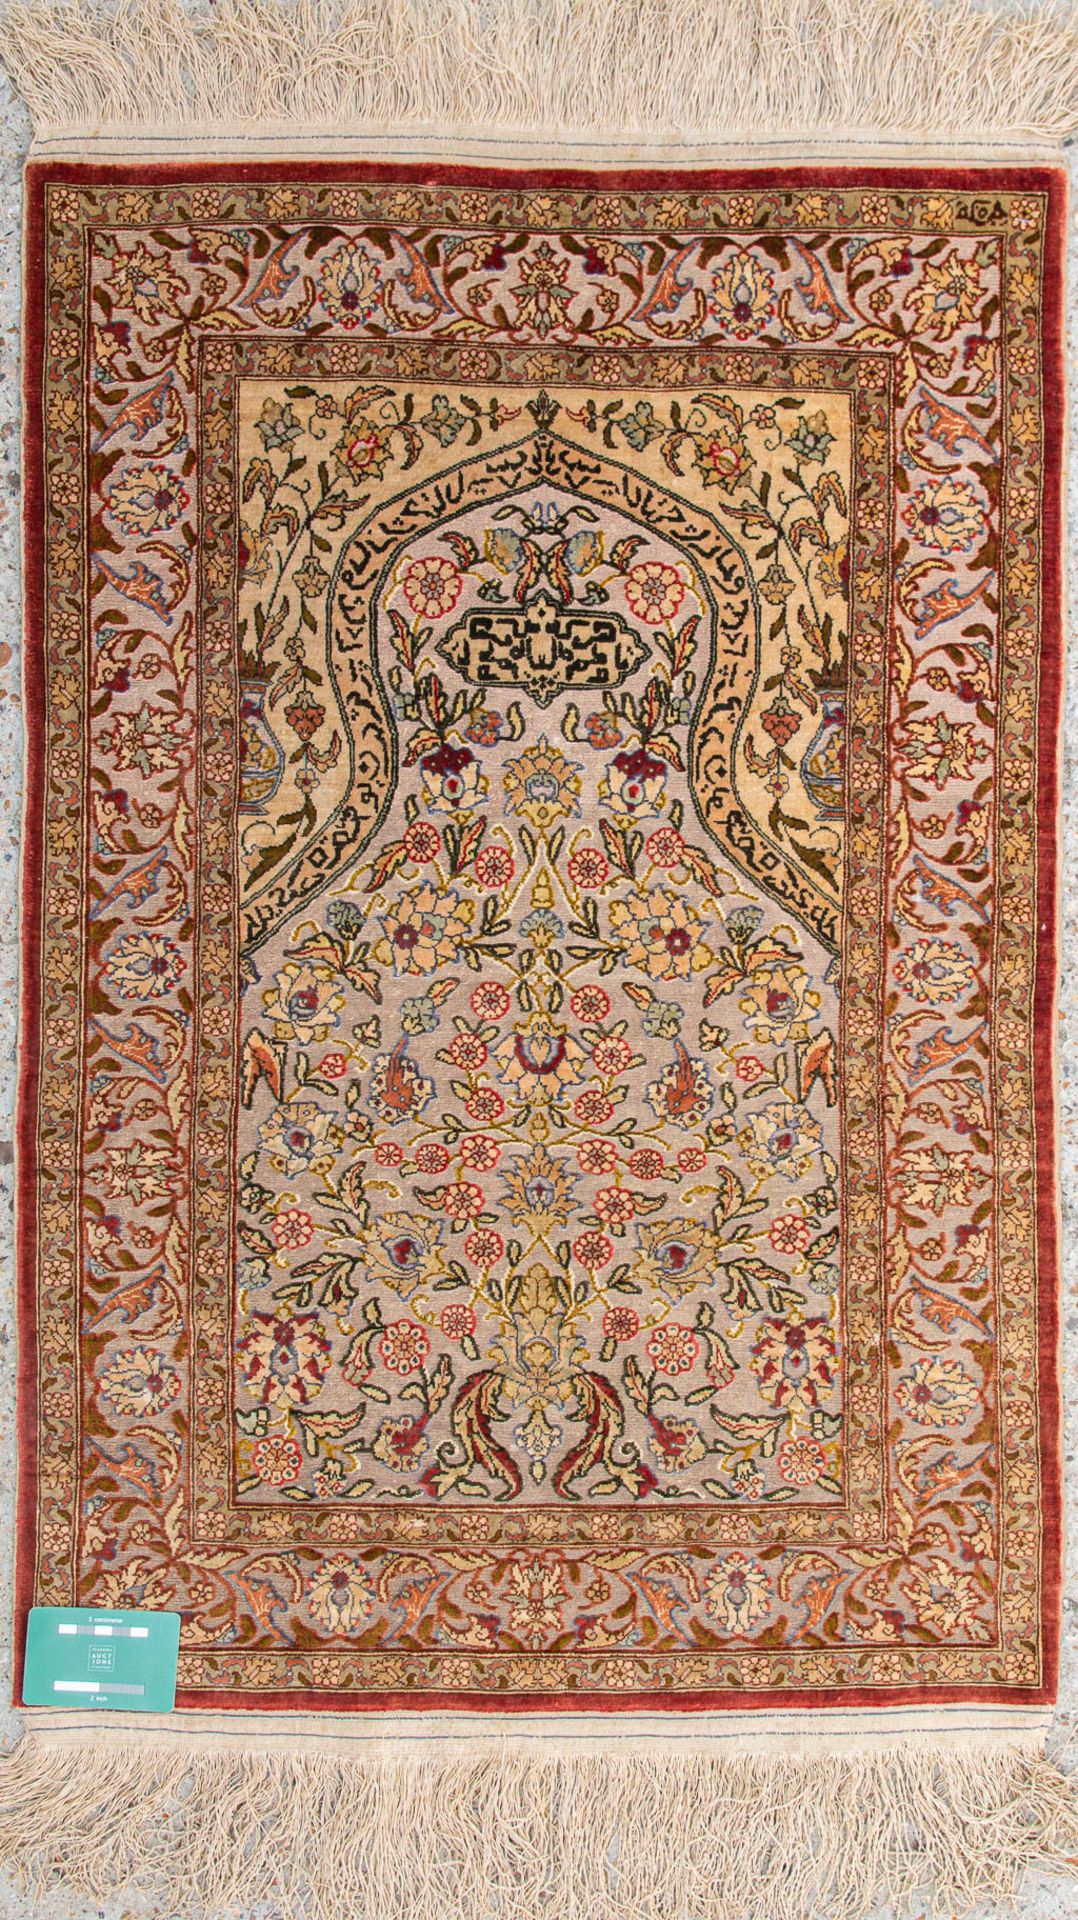 An Oriental hand-made prayer carpet made of silk and finished with gold thread. (58 x 87 cm) - Image 7 of 7